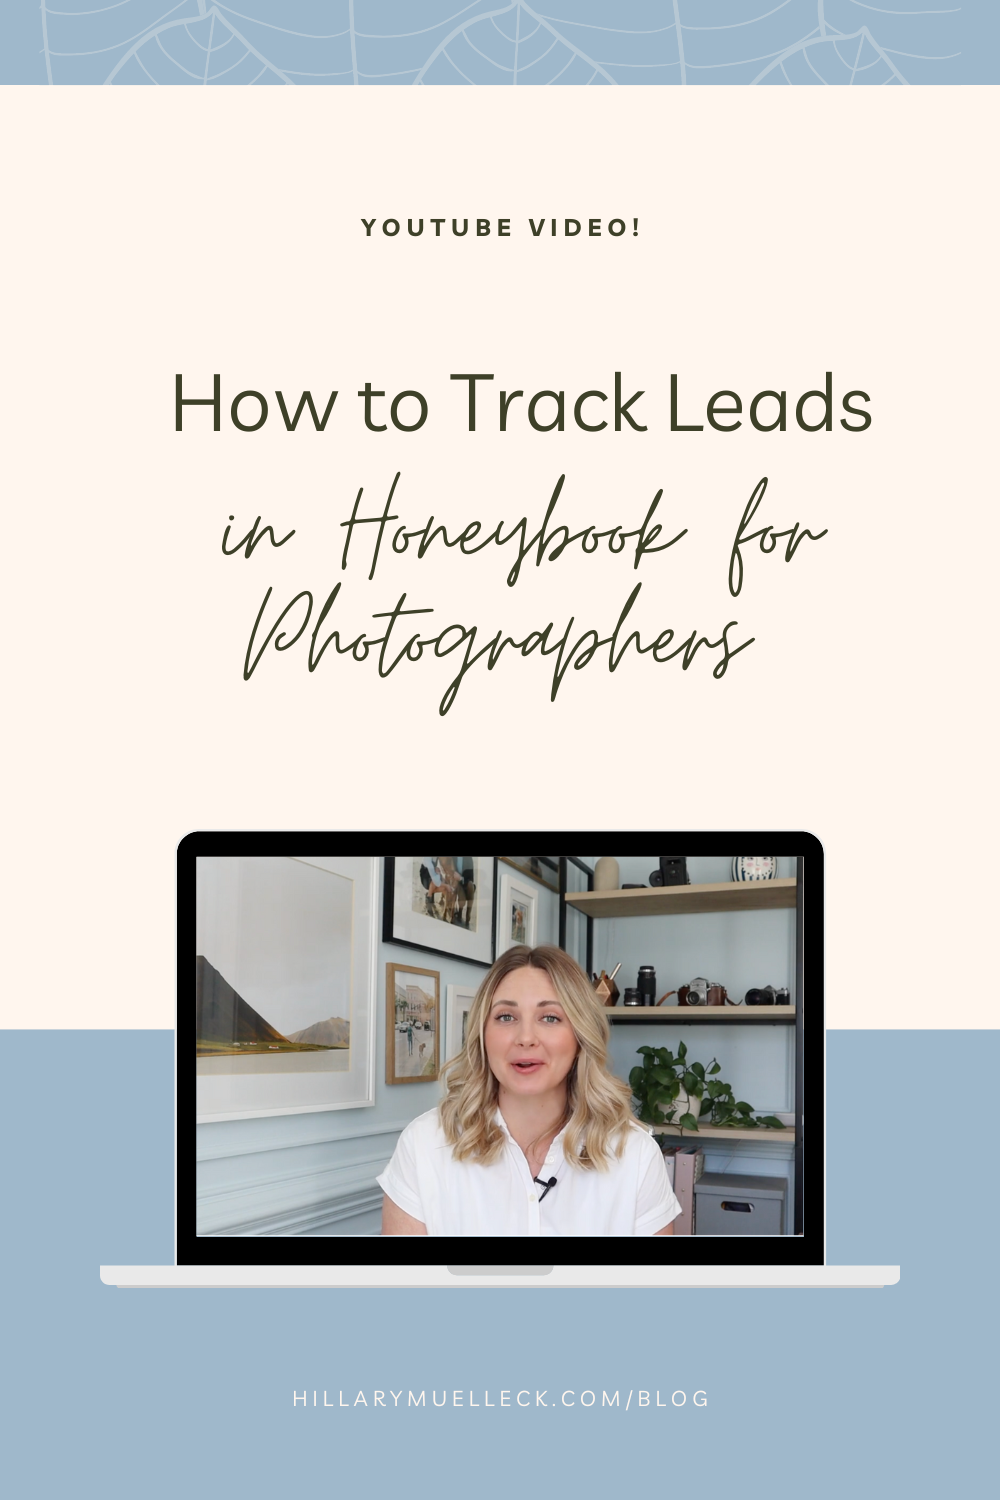 How to Track Leads in Honeybook: Wedding photographer Hillary Muelleck shares how to track inquiries in your Honeybook, a CRM